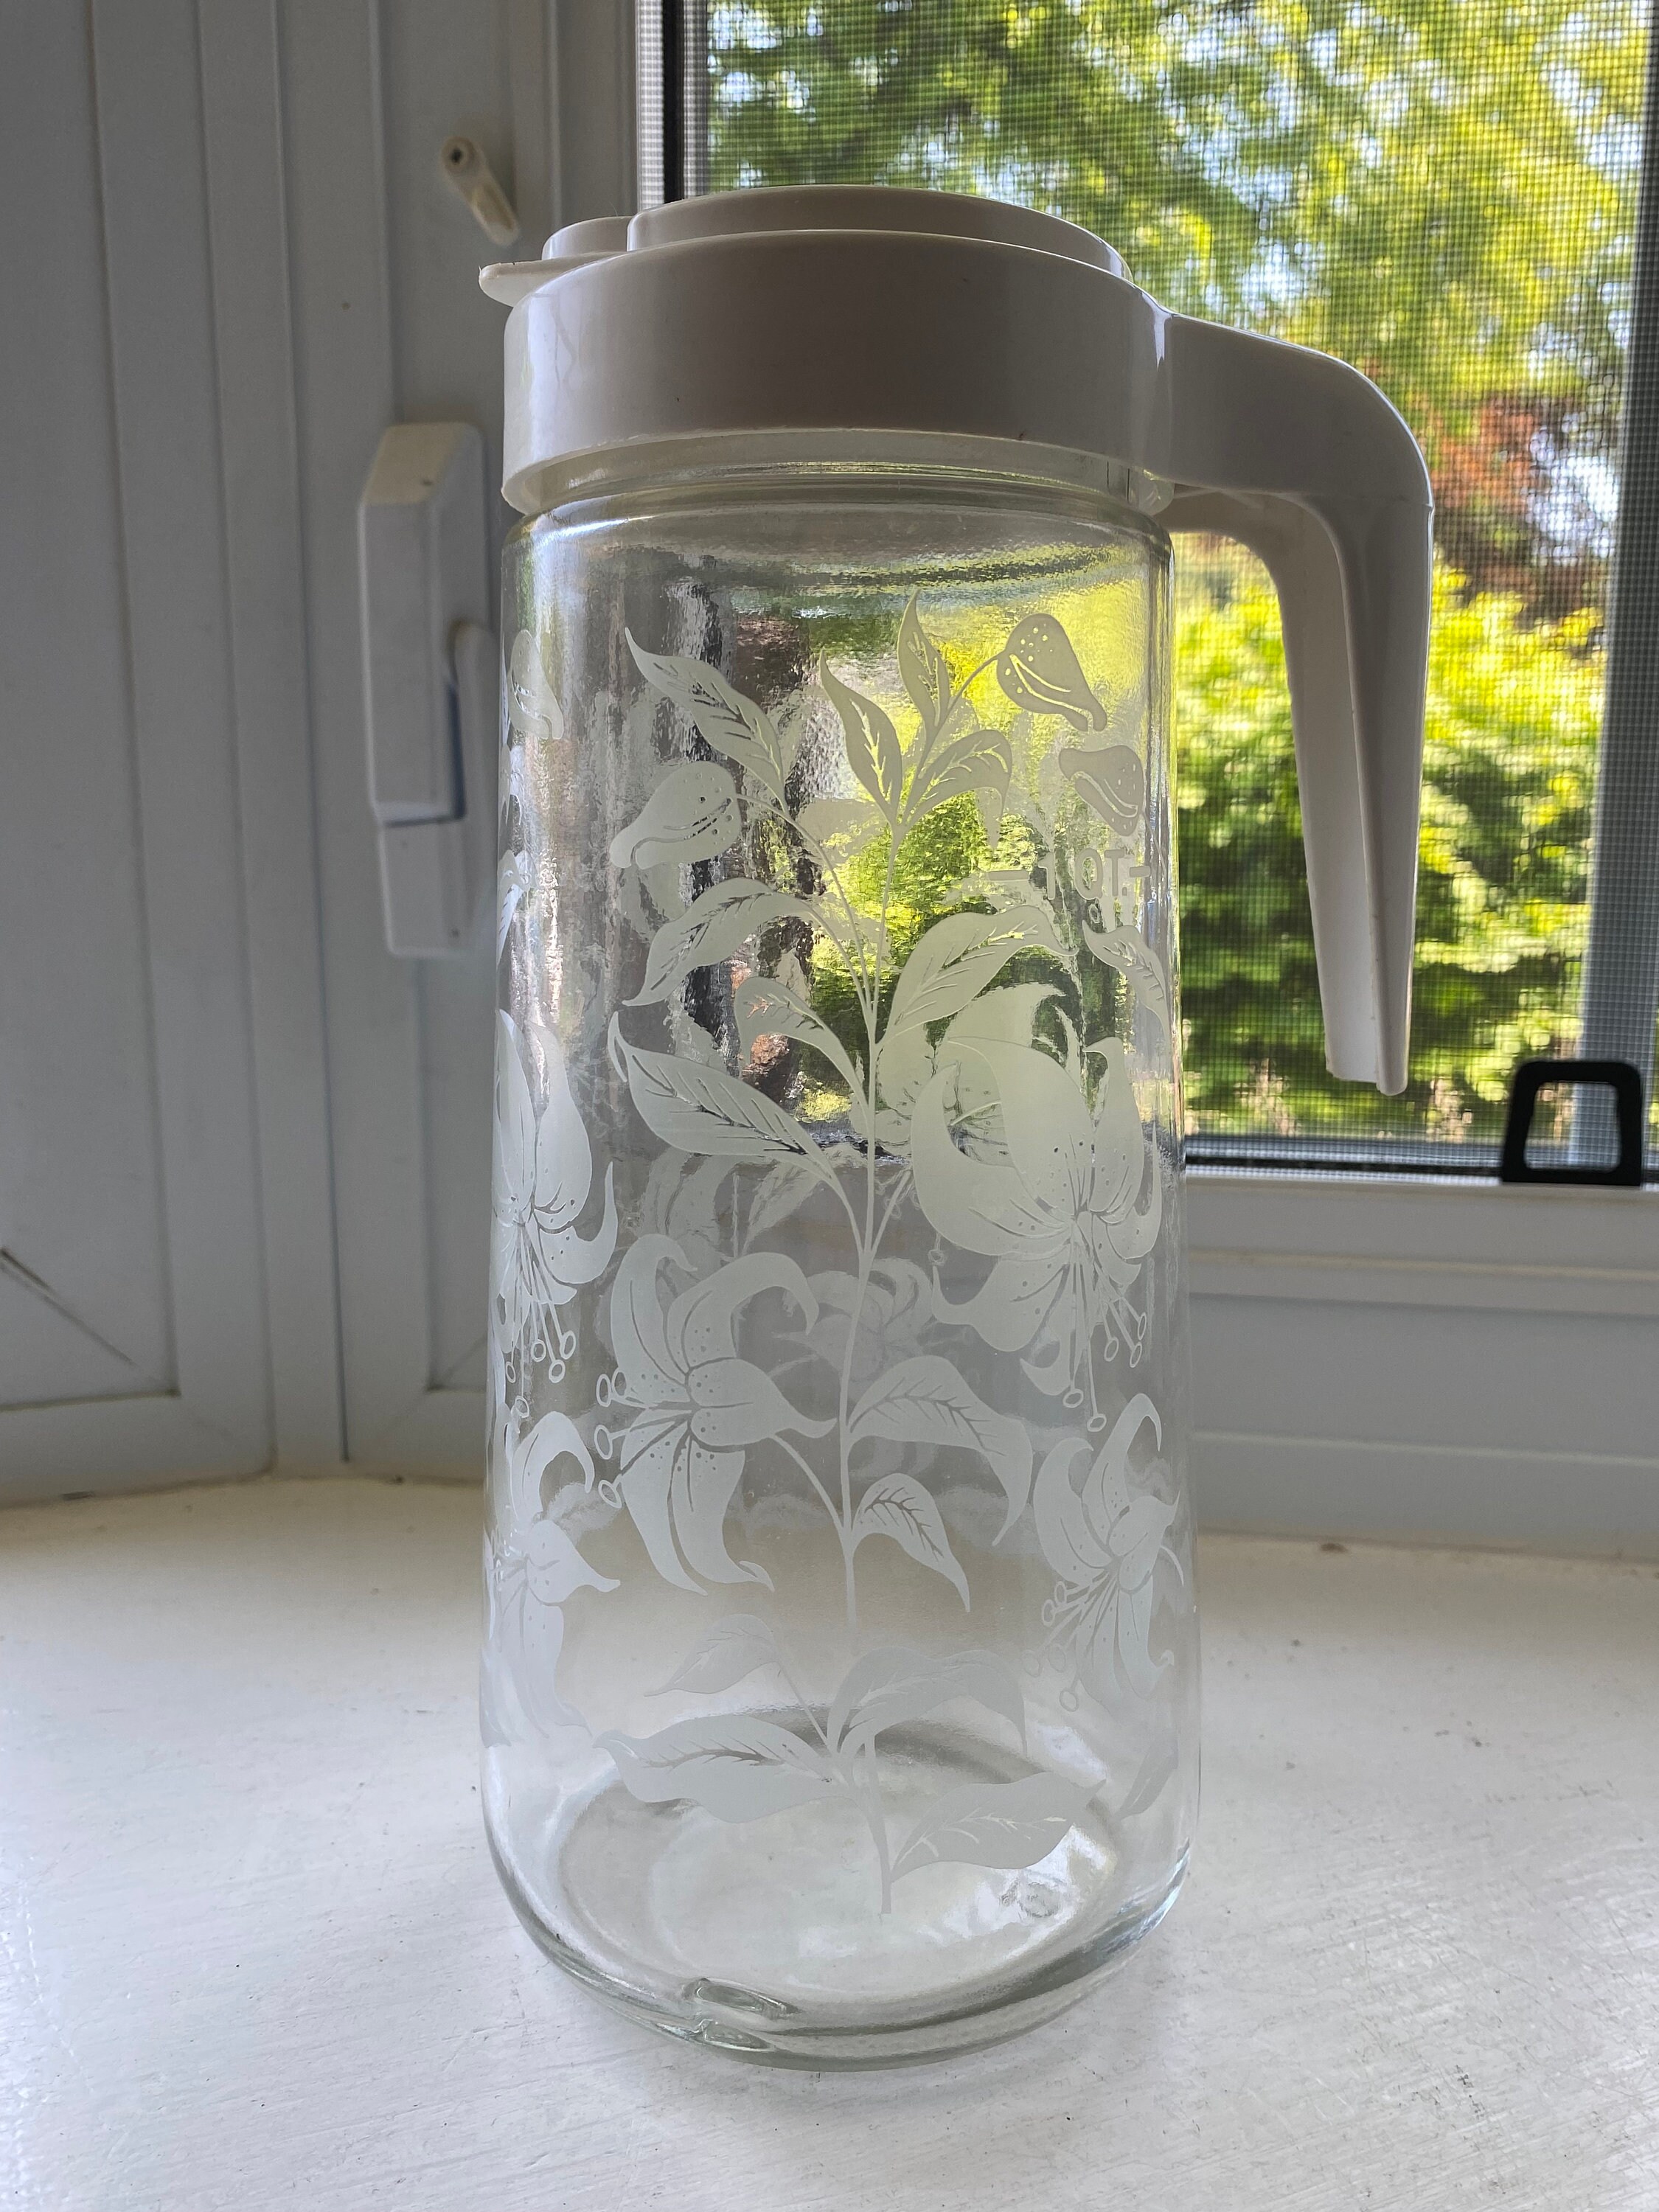 Vintage Anchor Hocking 1 Quart Pitcher with Etched Lilies Design and TANG  Lid